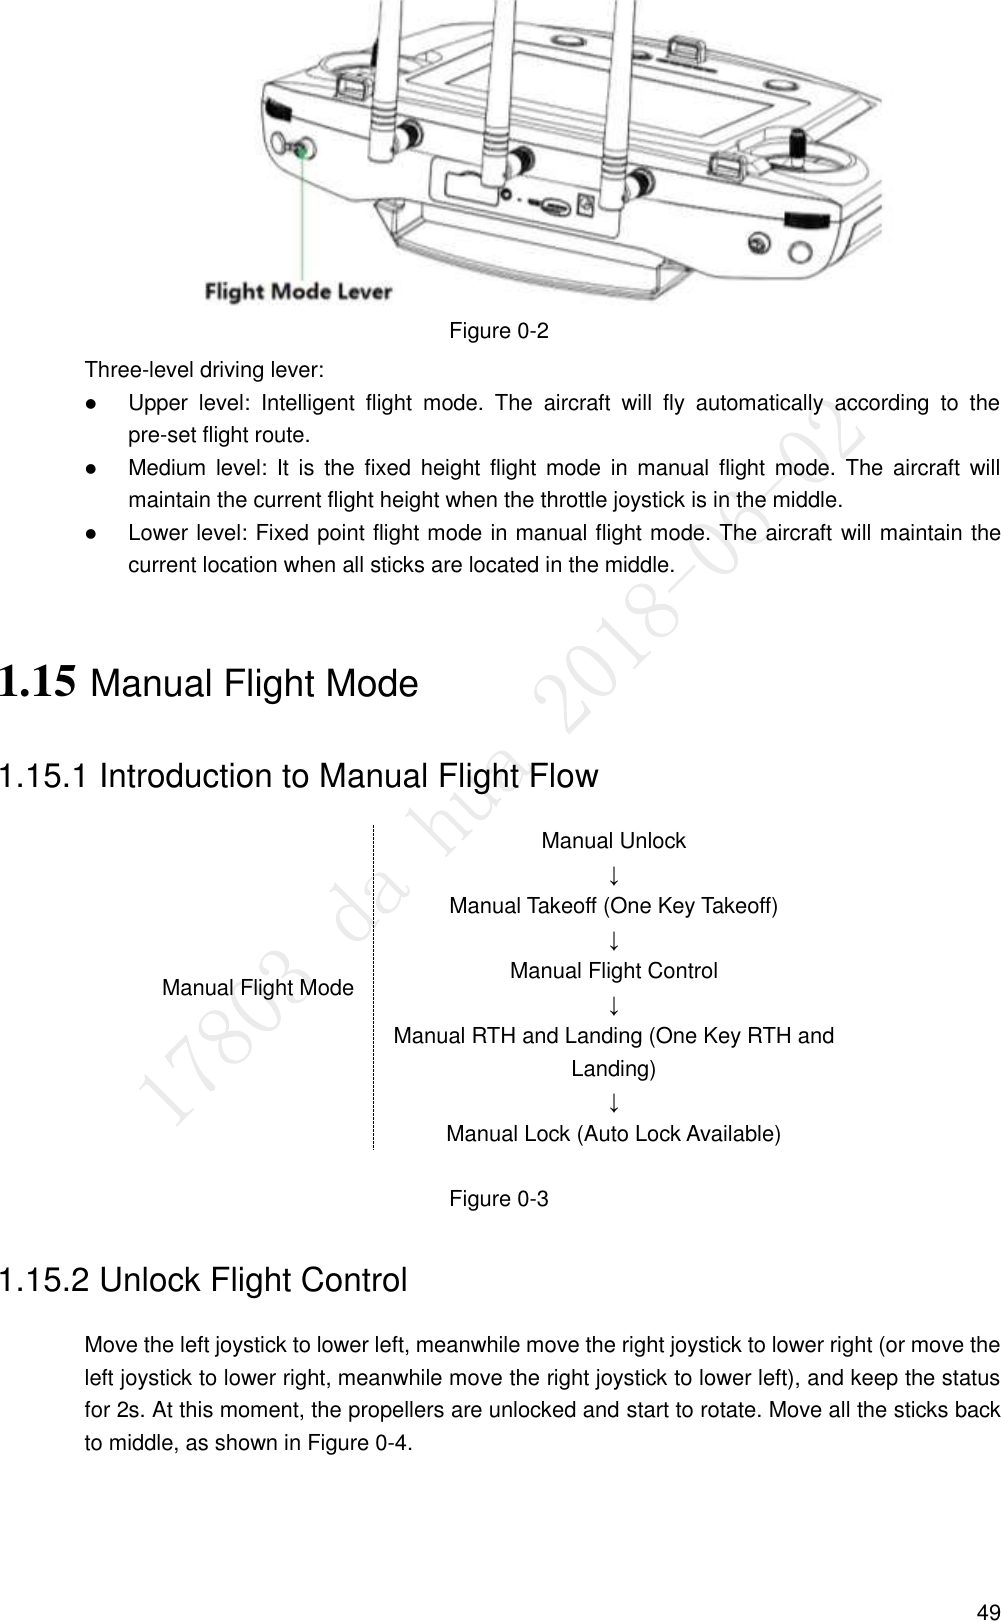  49  Figure 0-2 Three-level driving lever:  Upper  level:  Intelligent  flight  mode.  The  aircraft  will  fly  automatically  according  to  the pre-set flight route.  Medium level:  It  is  the  fixed  height  flight  mode  in  manual  flight mode.  The  aircraft  will maintain the current flight height when the throttle joystick is in the middle.  Lower level: Fixed point flight mode in manual flight mode. The aircraft will maintain the current location when all sticks are located in the middle. 1.15 Manual Flight Mode 1.15.1 Introduction to Manual Flight Flow Manual Flight Mode Manual Unlock ↓ Manual Takeoff (One Key Takeoff) ↓ Manual Flight Control ↓ Manual RTH and Landing (One Key RTH and Landing) ↓ Manual Lock (Auto Lock Available)  Figure 0-3 1.15.2 Unlock Flight Control Move the left joystick to lower left, meanwhile move the right joystick to lower right (or move the left joystick to lower right, meanwhile move the right joystick to lower left), and keep the status for 2s. At this moment, the propellers are unlocked and start to rotate. Move all the sticks back to middle, as shown in Figure 0-4. 